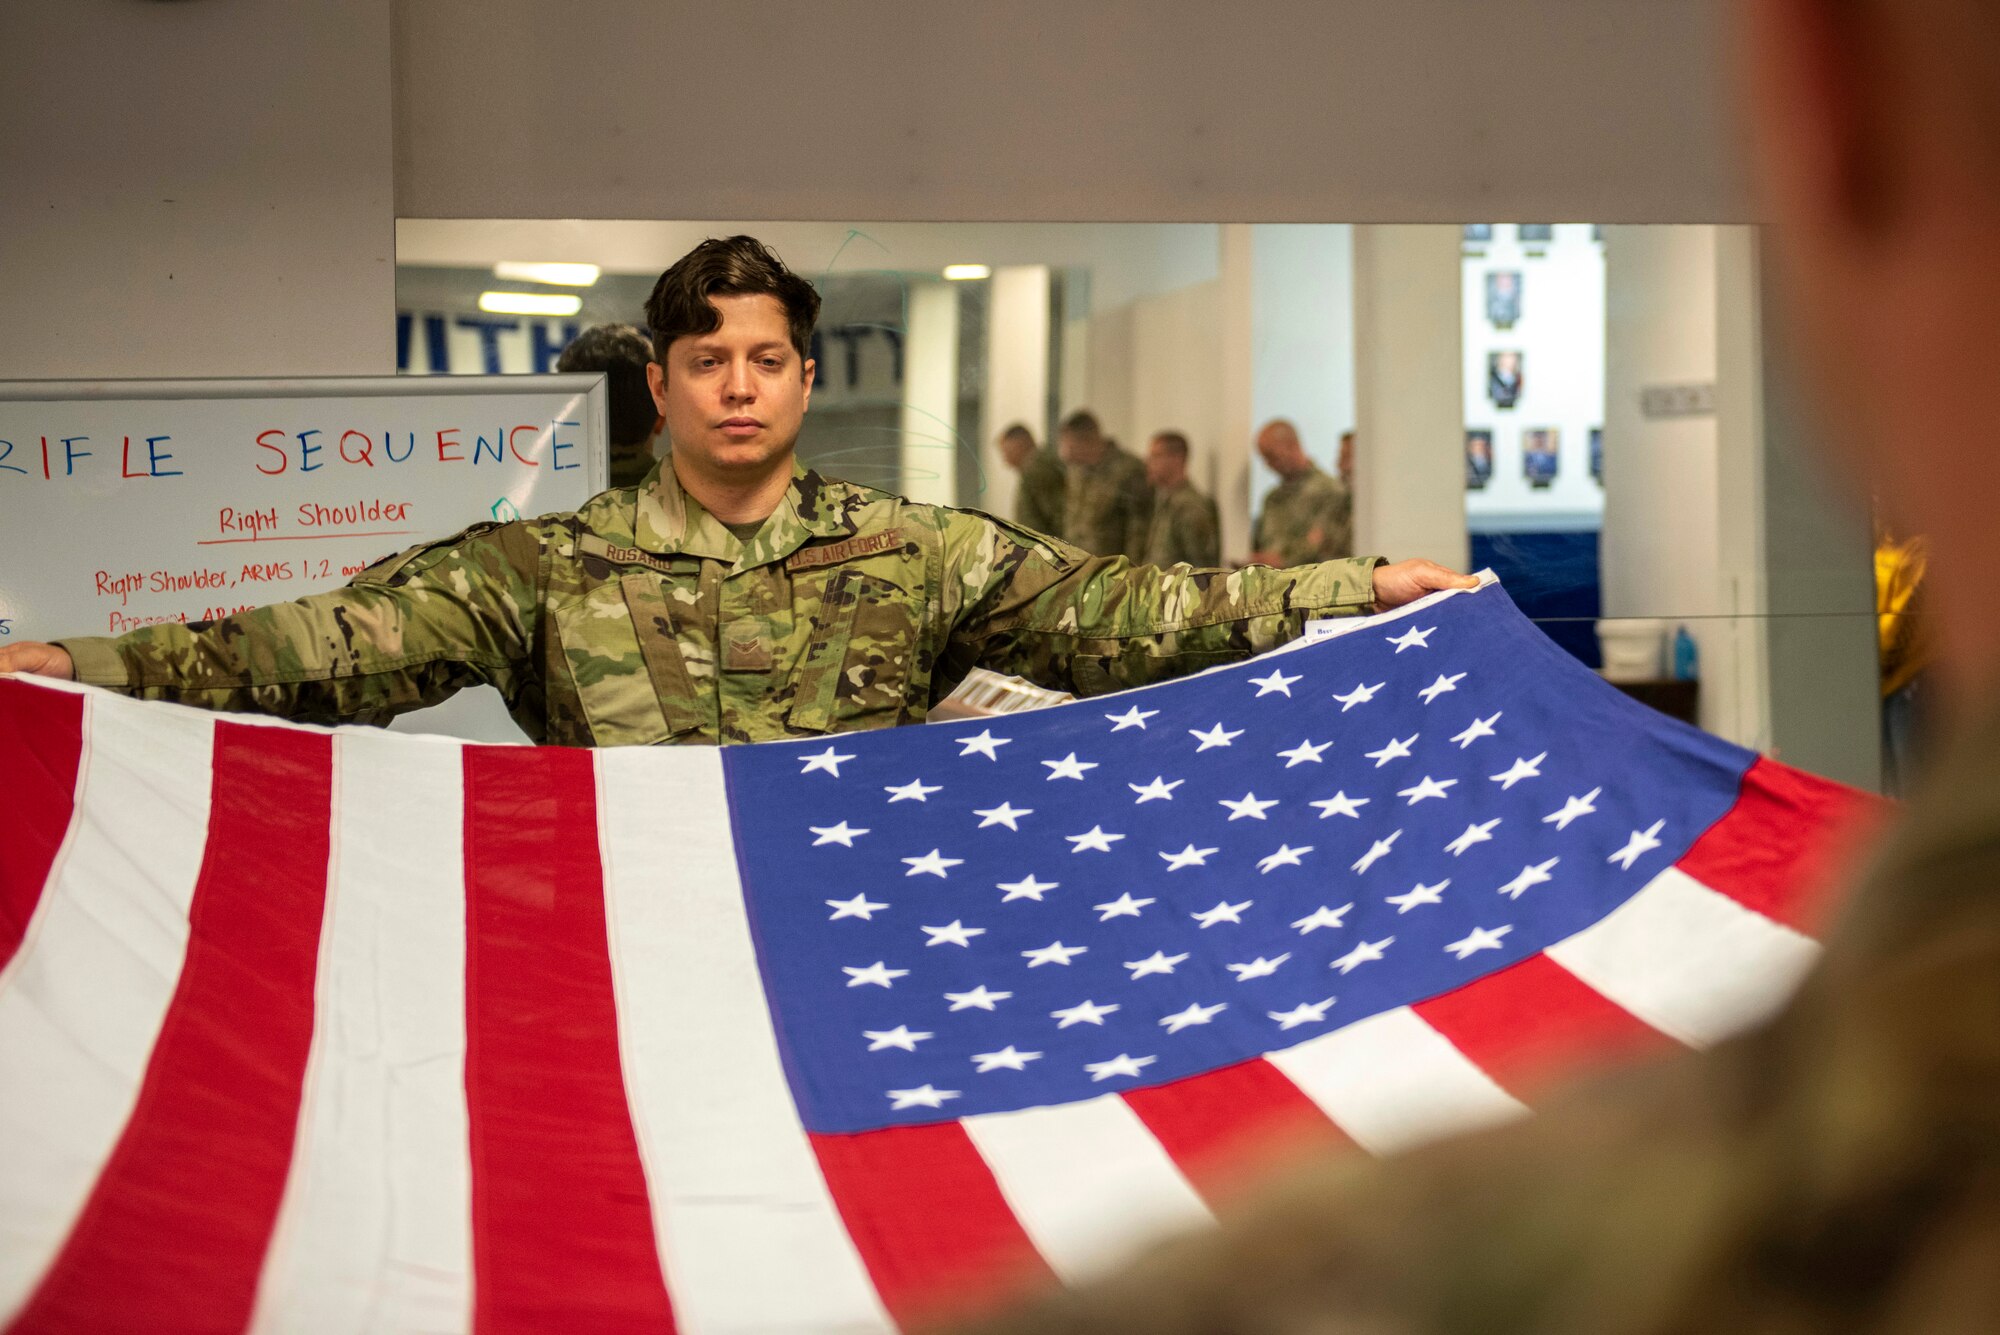 U.S. Air Force Airman 1st Class Richard Rosario, a Joint Base Elmendorf-Richardson Honor Guardsman, demonstrates a ceremonial folding of the flag during an Honor Guard Open House at JBER, Alaska, July 19, 2021. The Honor Guard hosted the event to encourage Airmen to participate in the Honor Guard program. (U.S. Air Force photo by Senior Airman Emily Farnsworth)